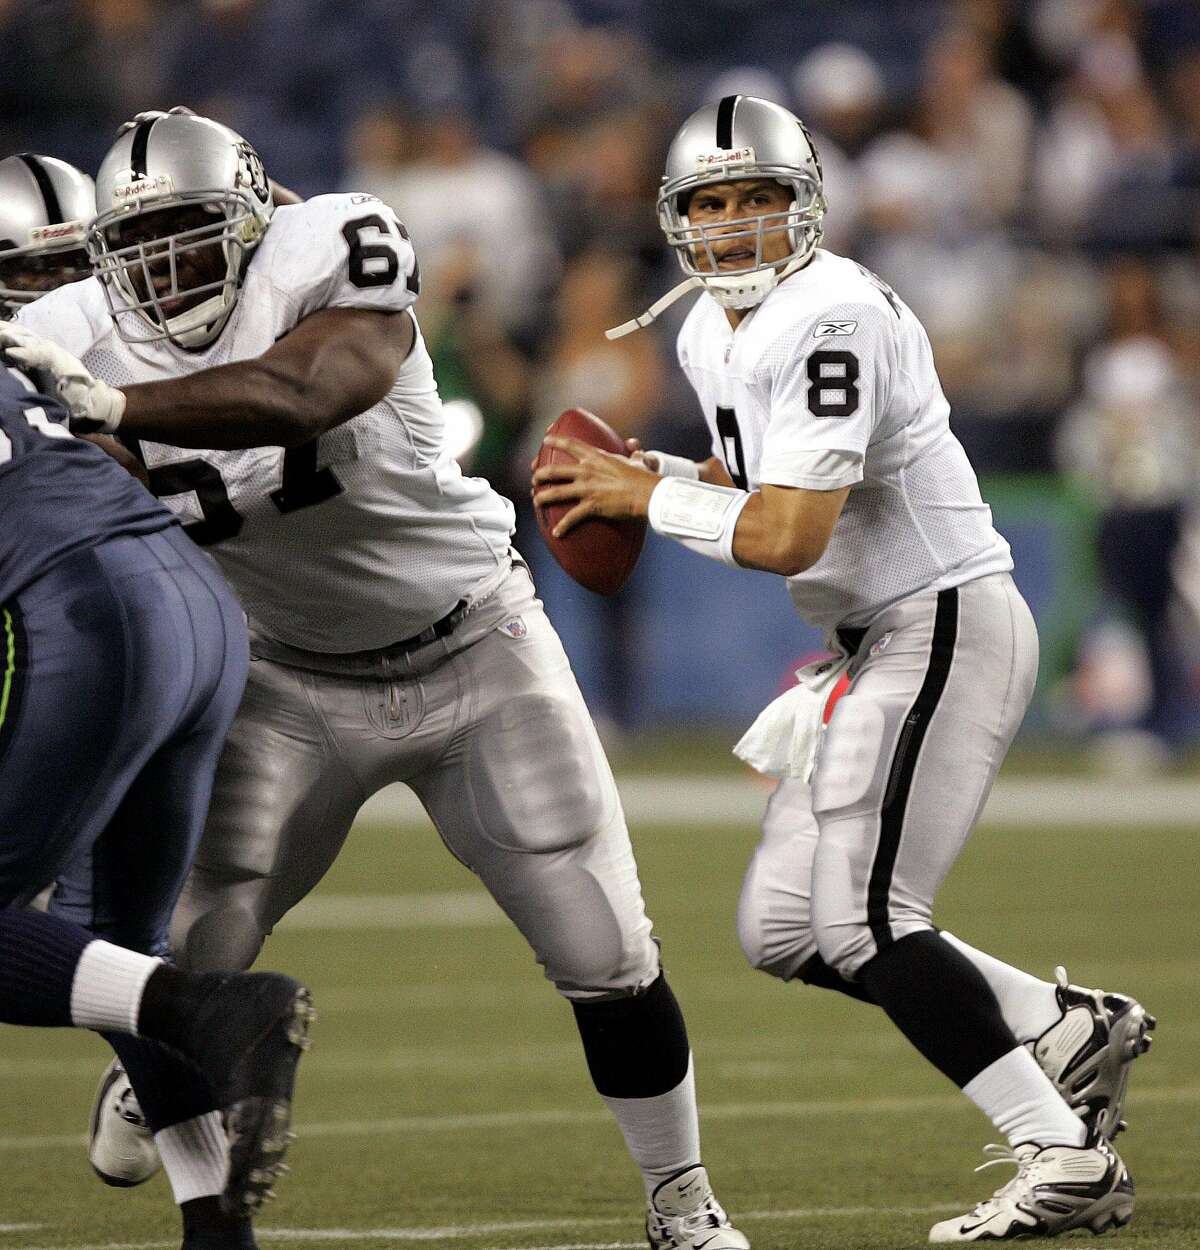 Oakland Raiders quarterback Marques Tuiasosopo drops back to pass against the Seattle Seahawks in the second half of an NFL exhibition football game in Seattle as Kevin Boothe blocks, Thursday, Aug. 31, 2006. The Seahawks won 30-7. (AP Photo/Elaine Thompson) Ran on: 09-22-2006 Rookie guard Kevin Boothe is a sixth-round pick out of Cornell. Ran on: 09-29-2006 Marques Tuiasosopo returns to his role as No. 2 QB with Aaron Brooks out with an injury. Ran on: 10-10-2006 Kevin Boothe is listed as questionable after sustaining a broken nose against the 49ers.